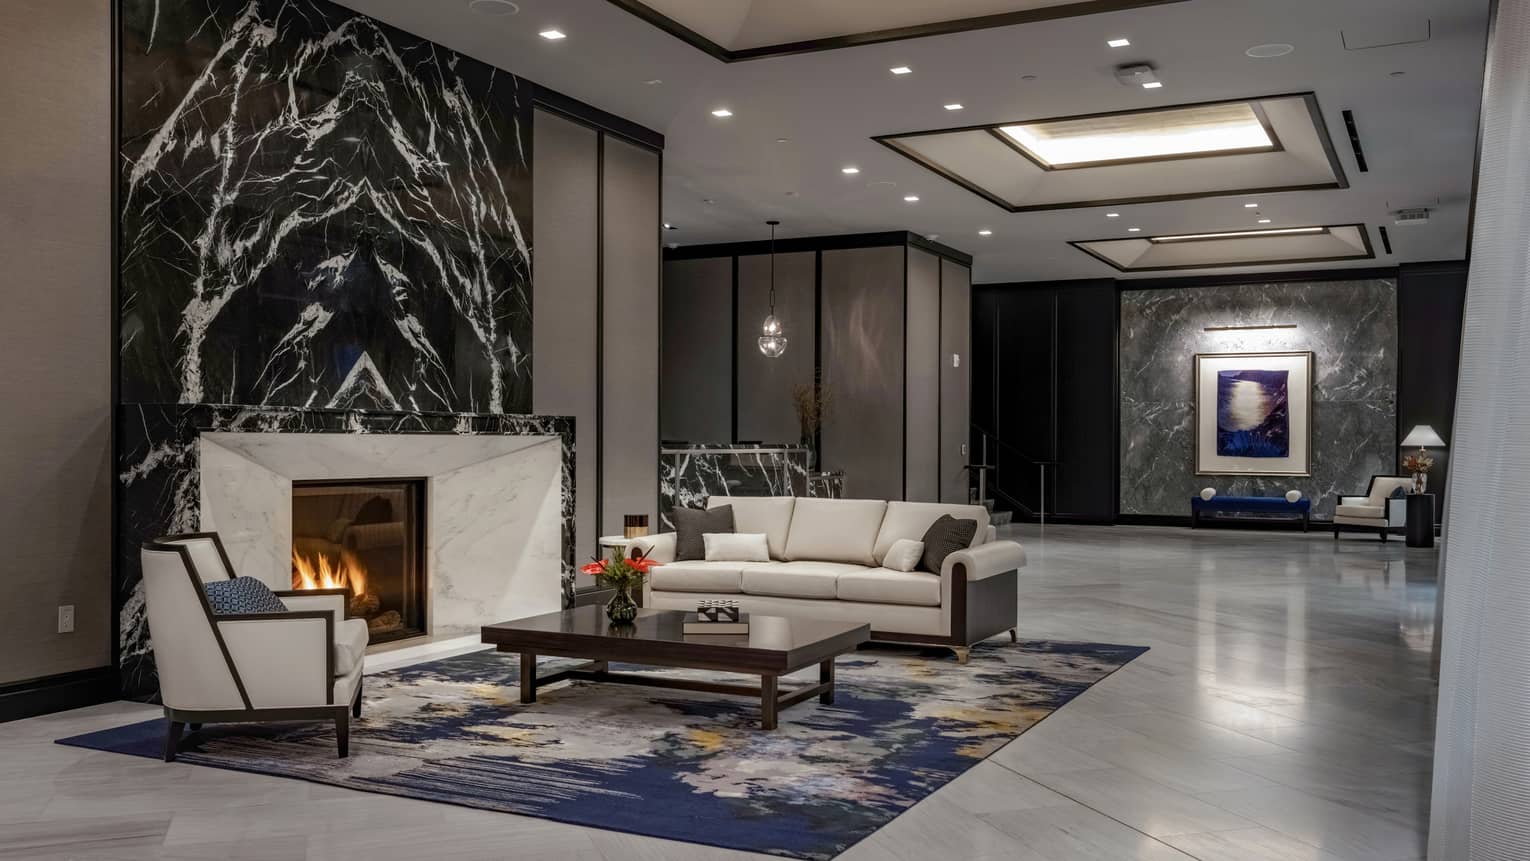 Lobby area with fireplace, couch and lounge chair.